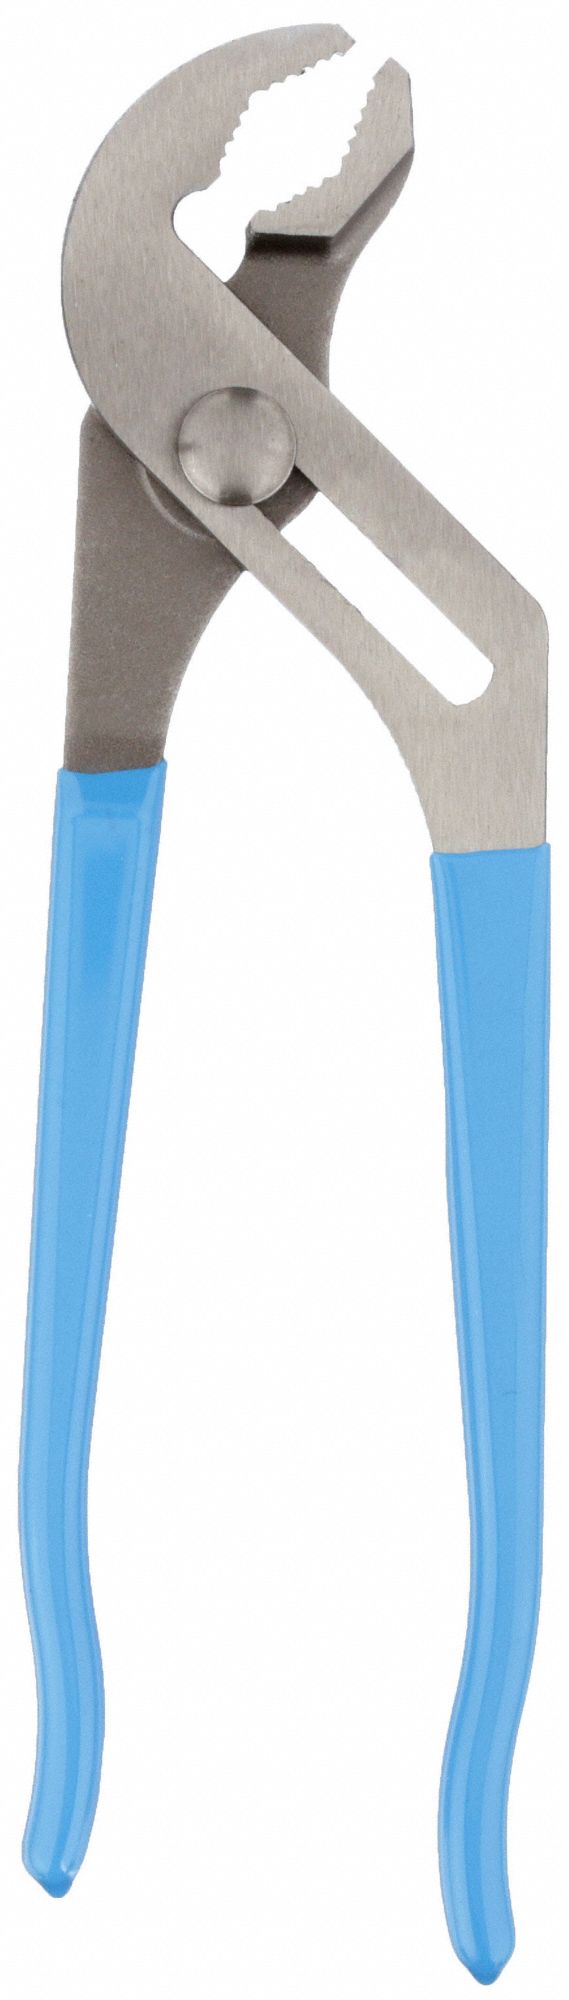 CHANNELLOCK PLIERS CHANNEL LOCK - Adjustable Tongue